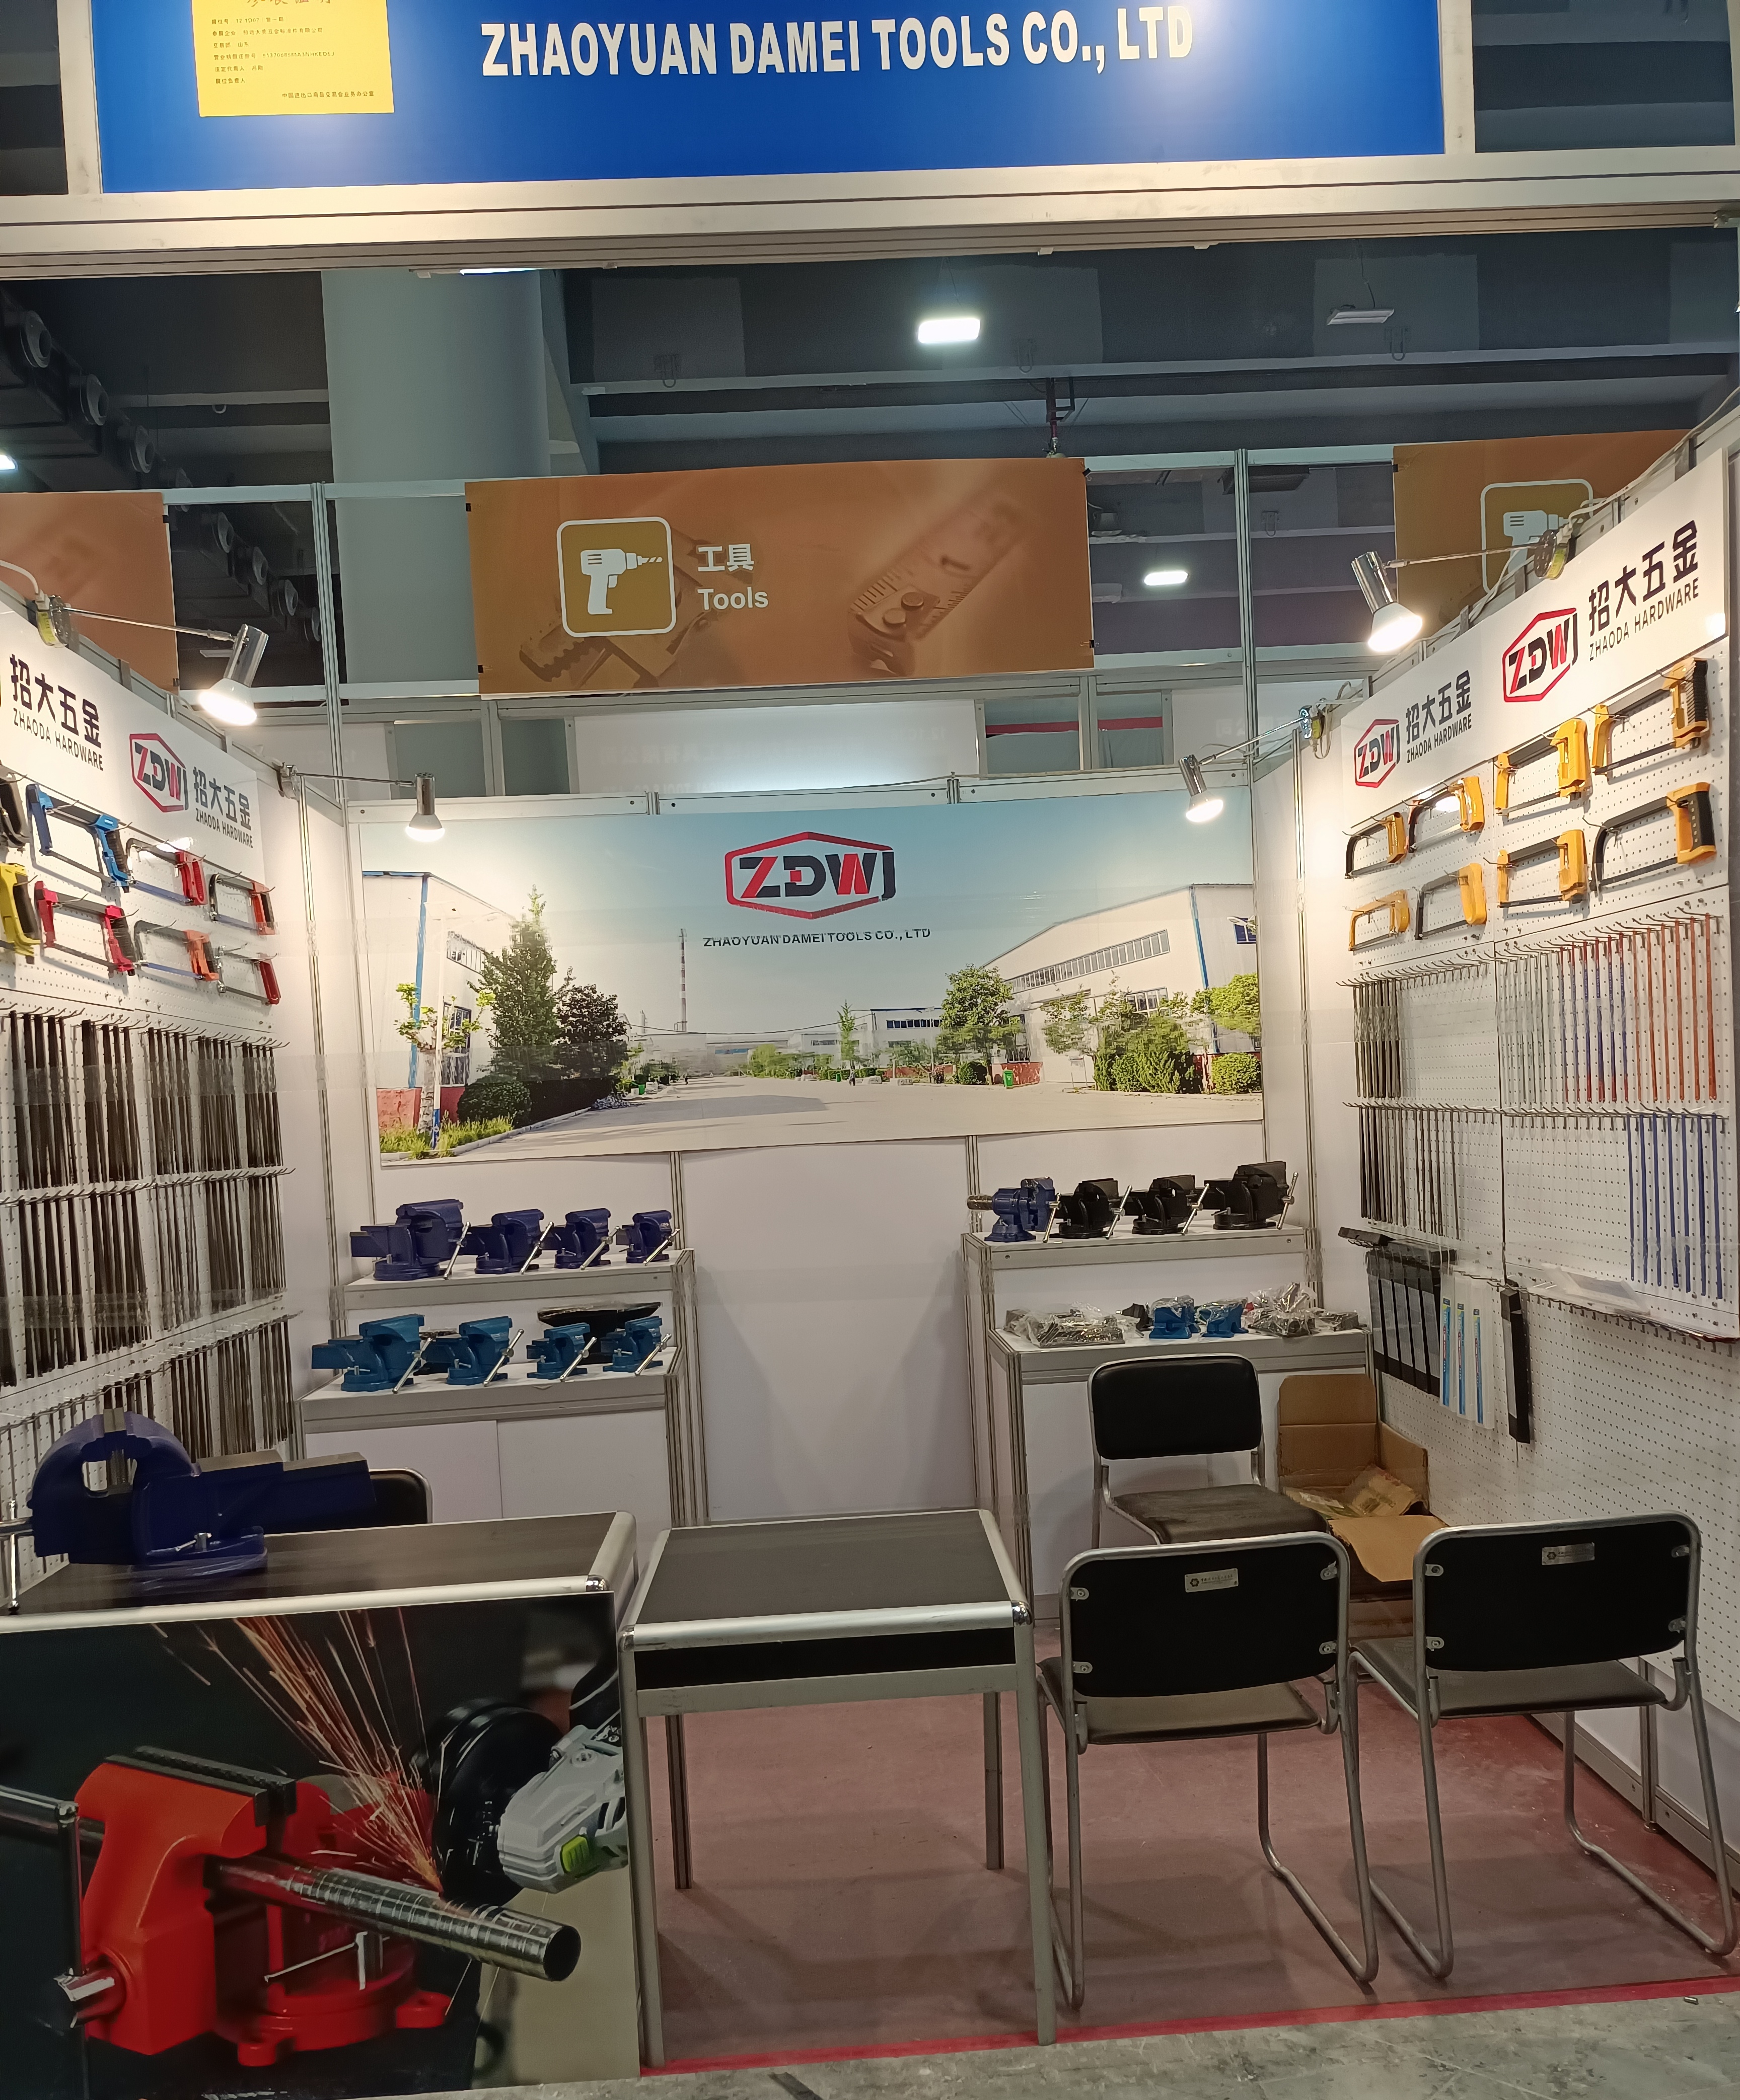 WELCOME TO DAMEI TOOLS’ CANTON FAIR BOOTH